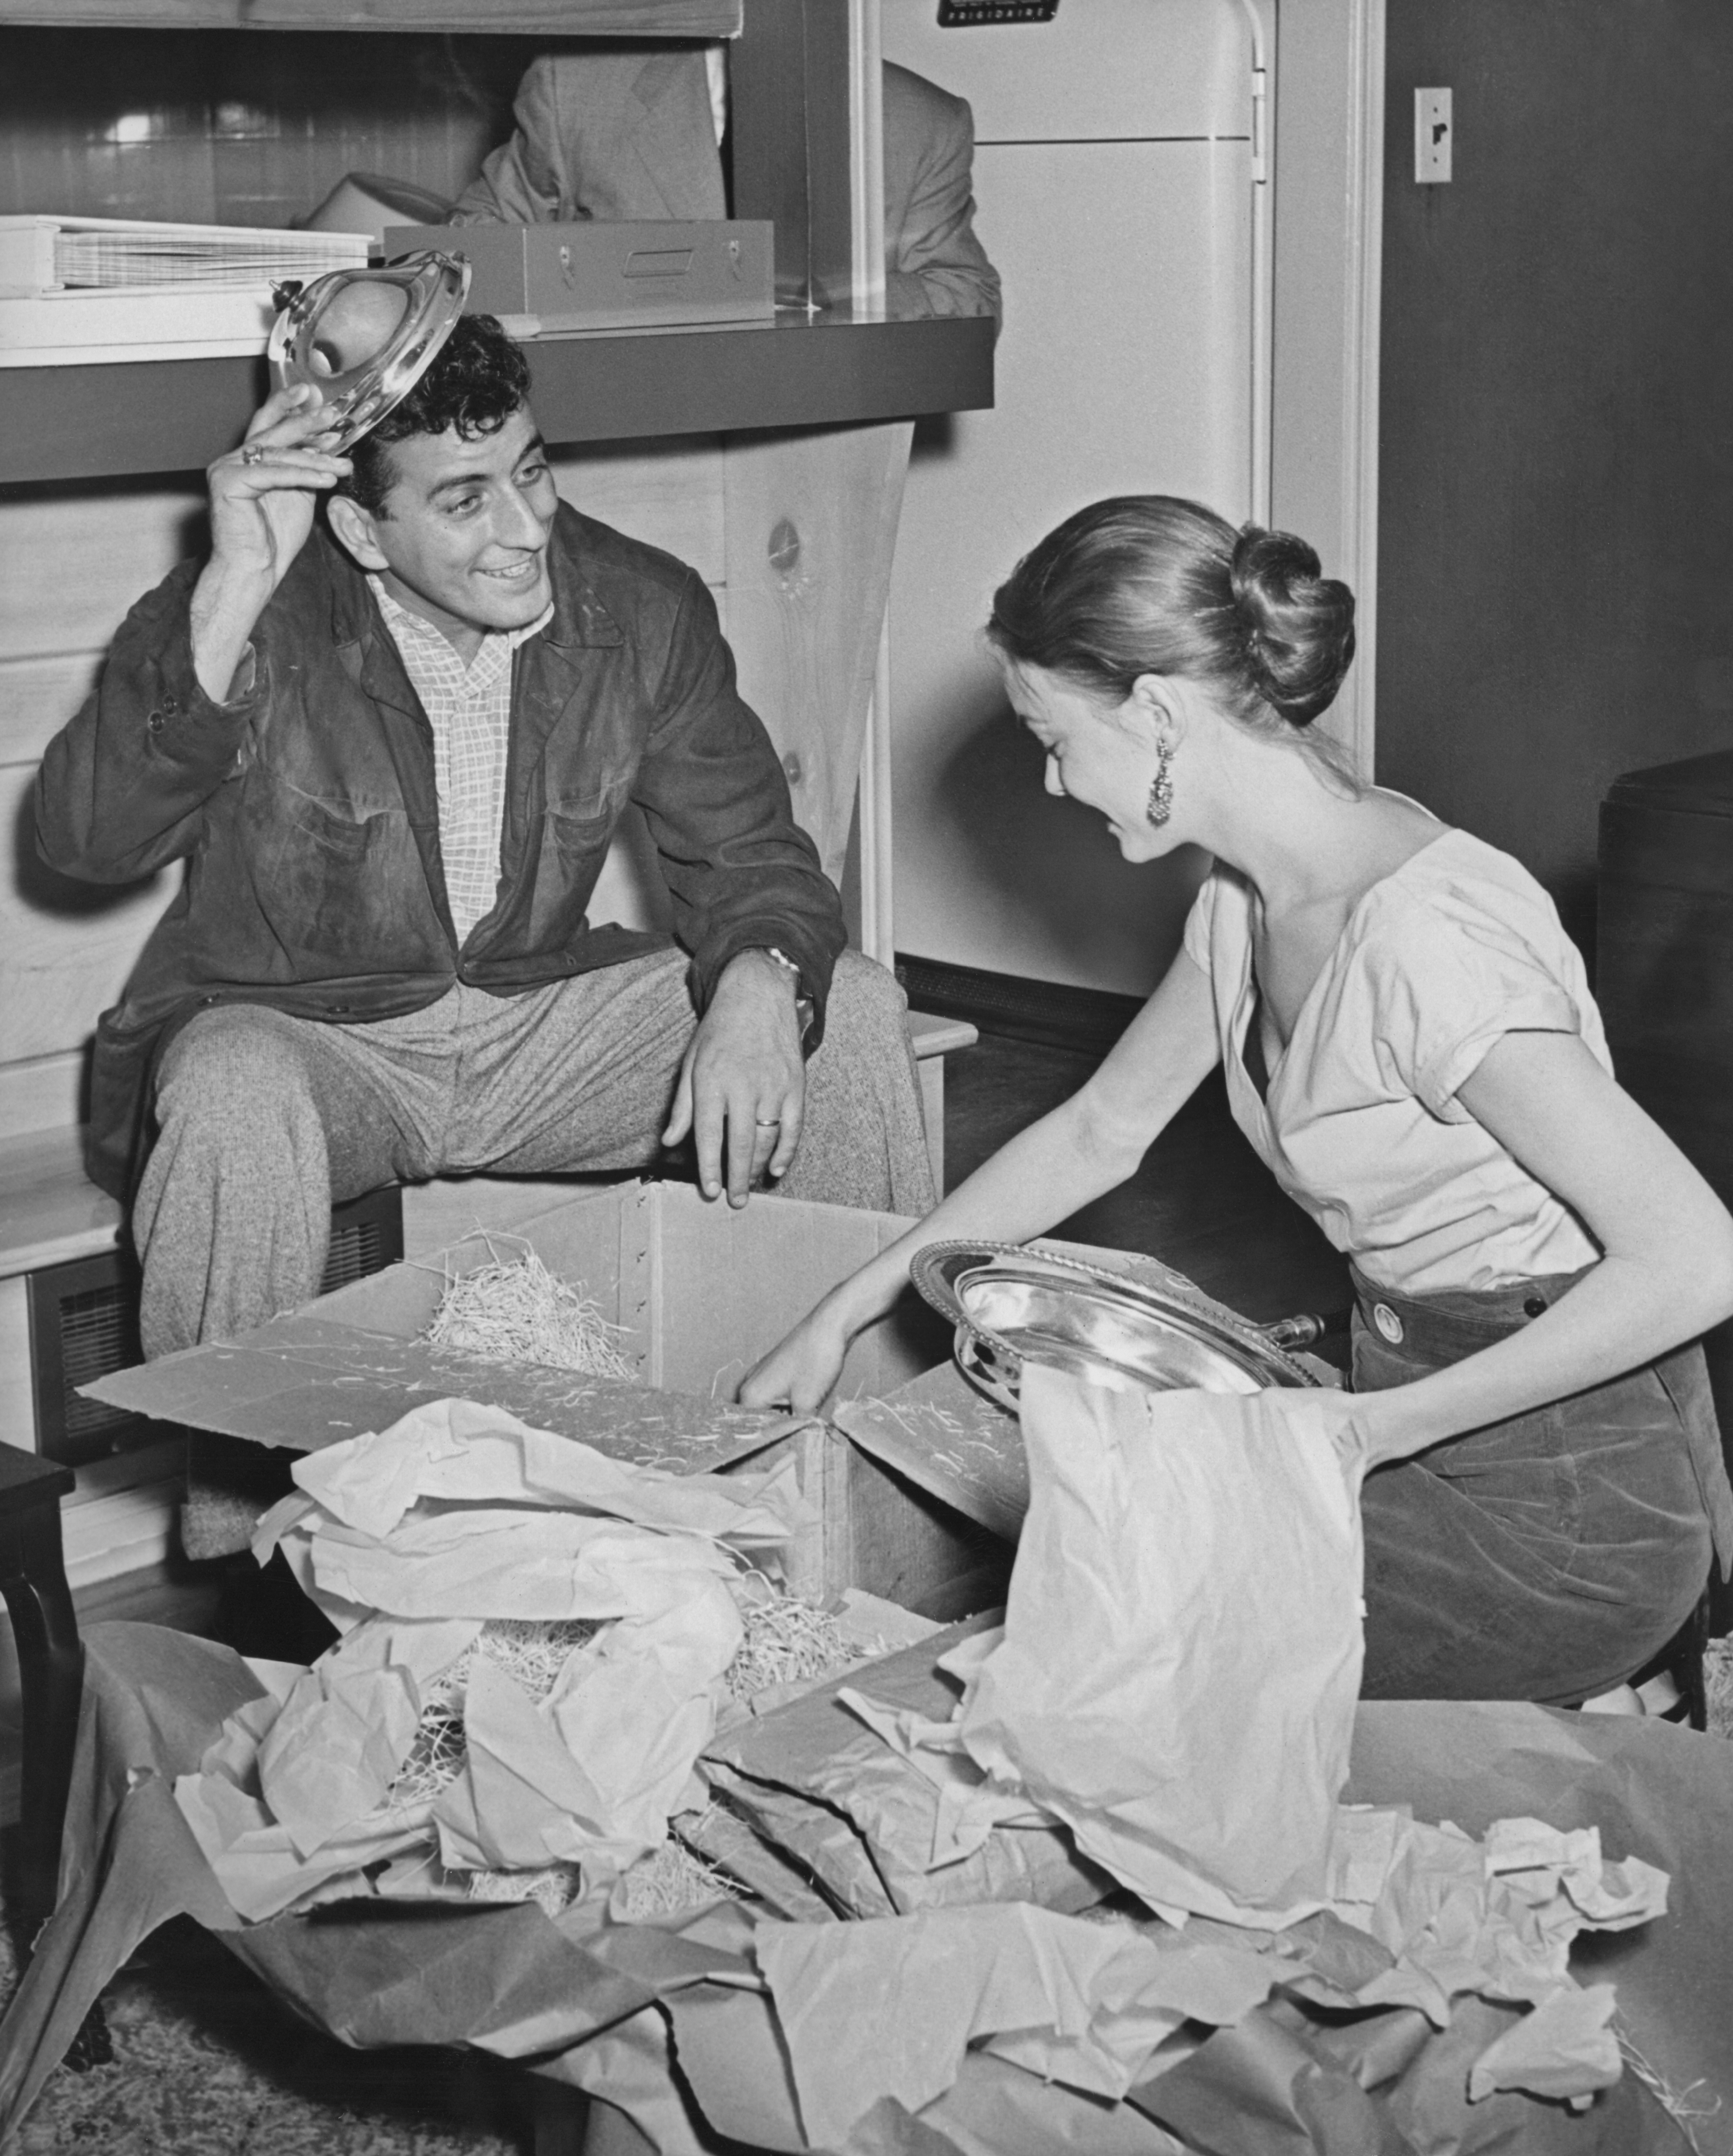 Tony Bennett and Patricia Beech unpacking circa 1955 | Source: Getty Images